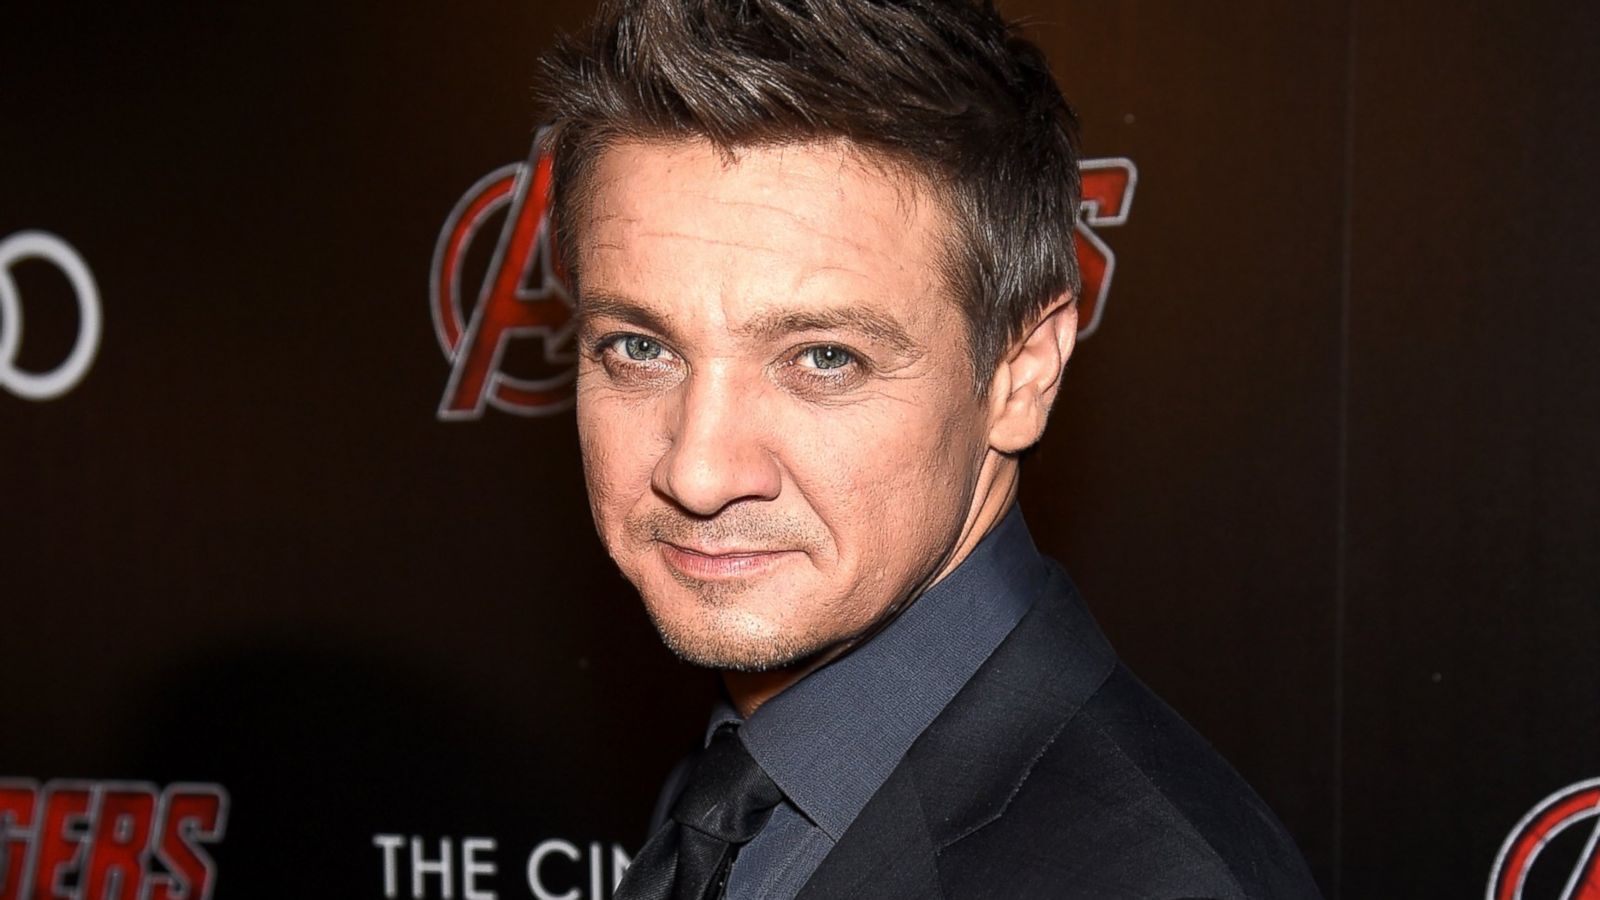 Jeremy Renner Opens Up About Divorce and Sexual Preference Rumors - ABC News